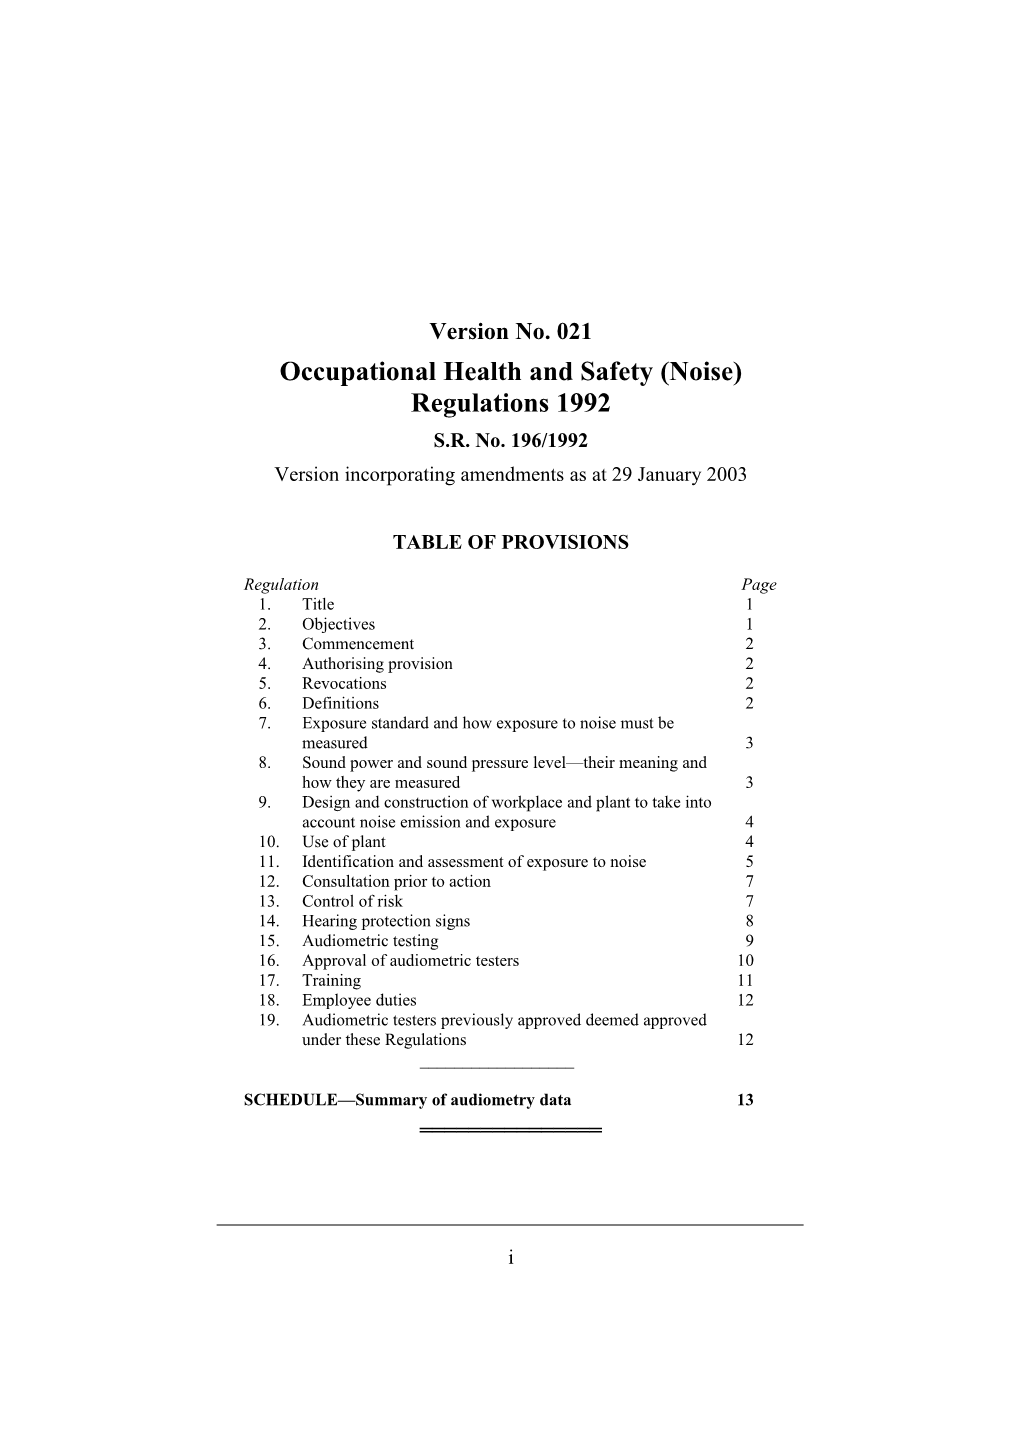 Occupational Health and Safety (Noise) Regulations 1992